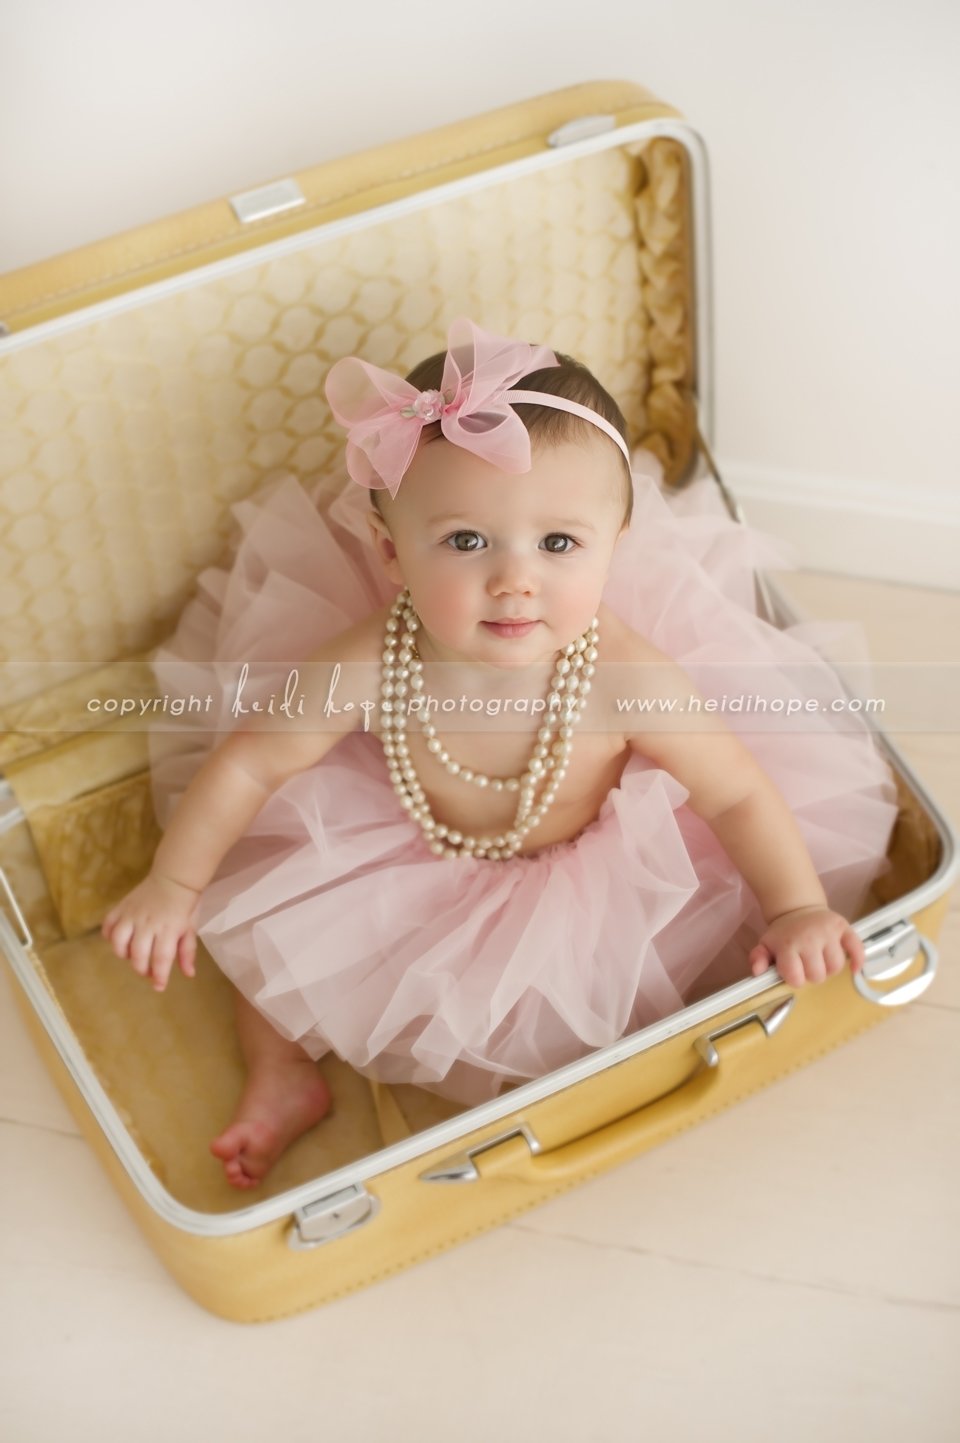 10 Great 6 Month Old Picture Ideas awesome 1 month old baby girl photo ideas selection photo and 5 2022